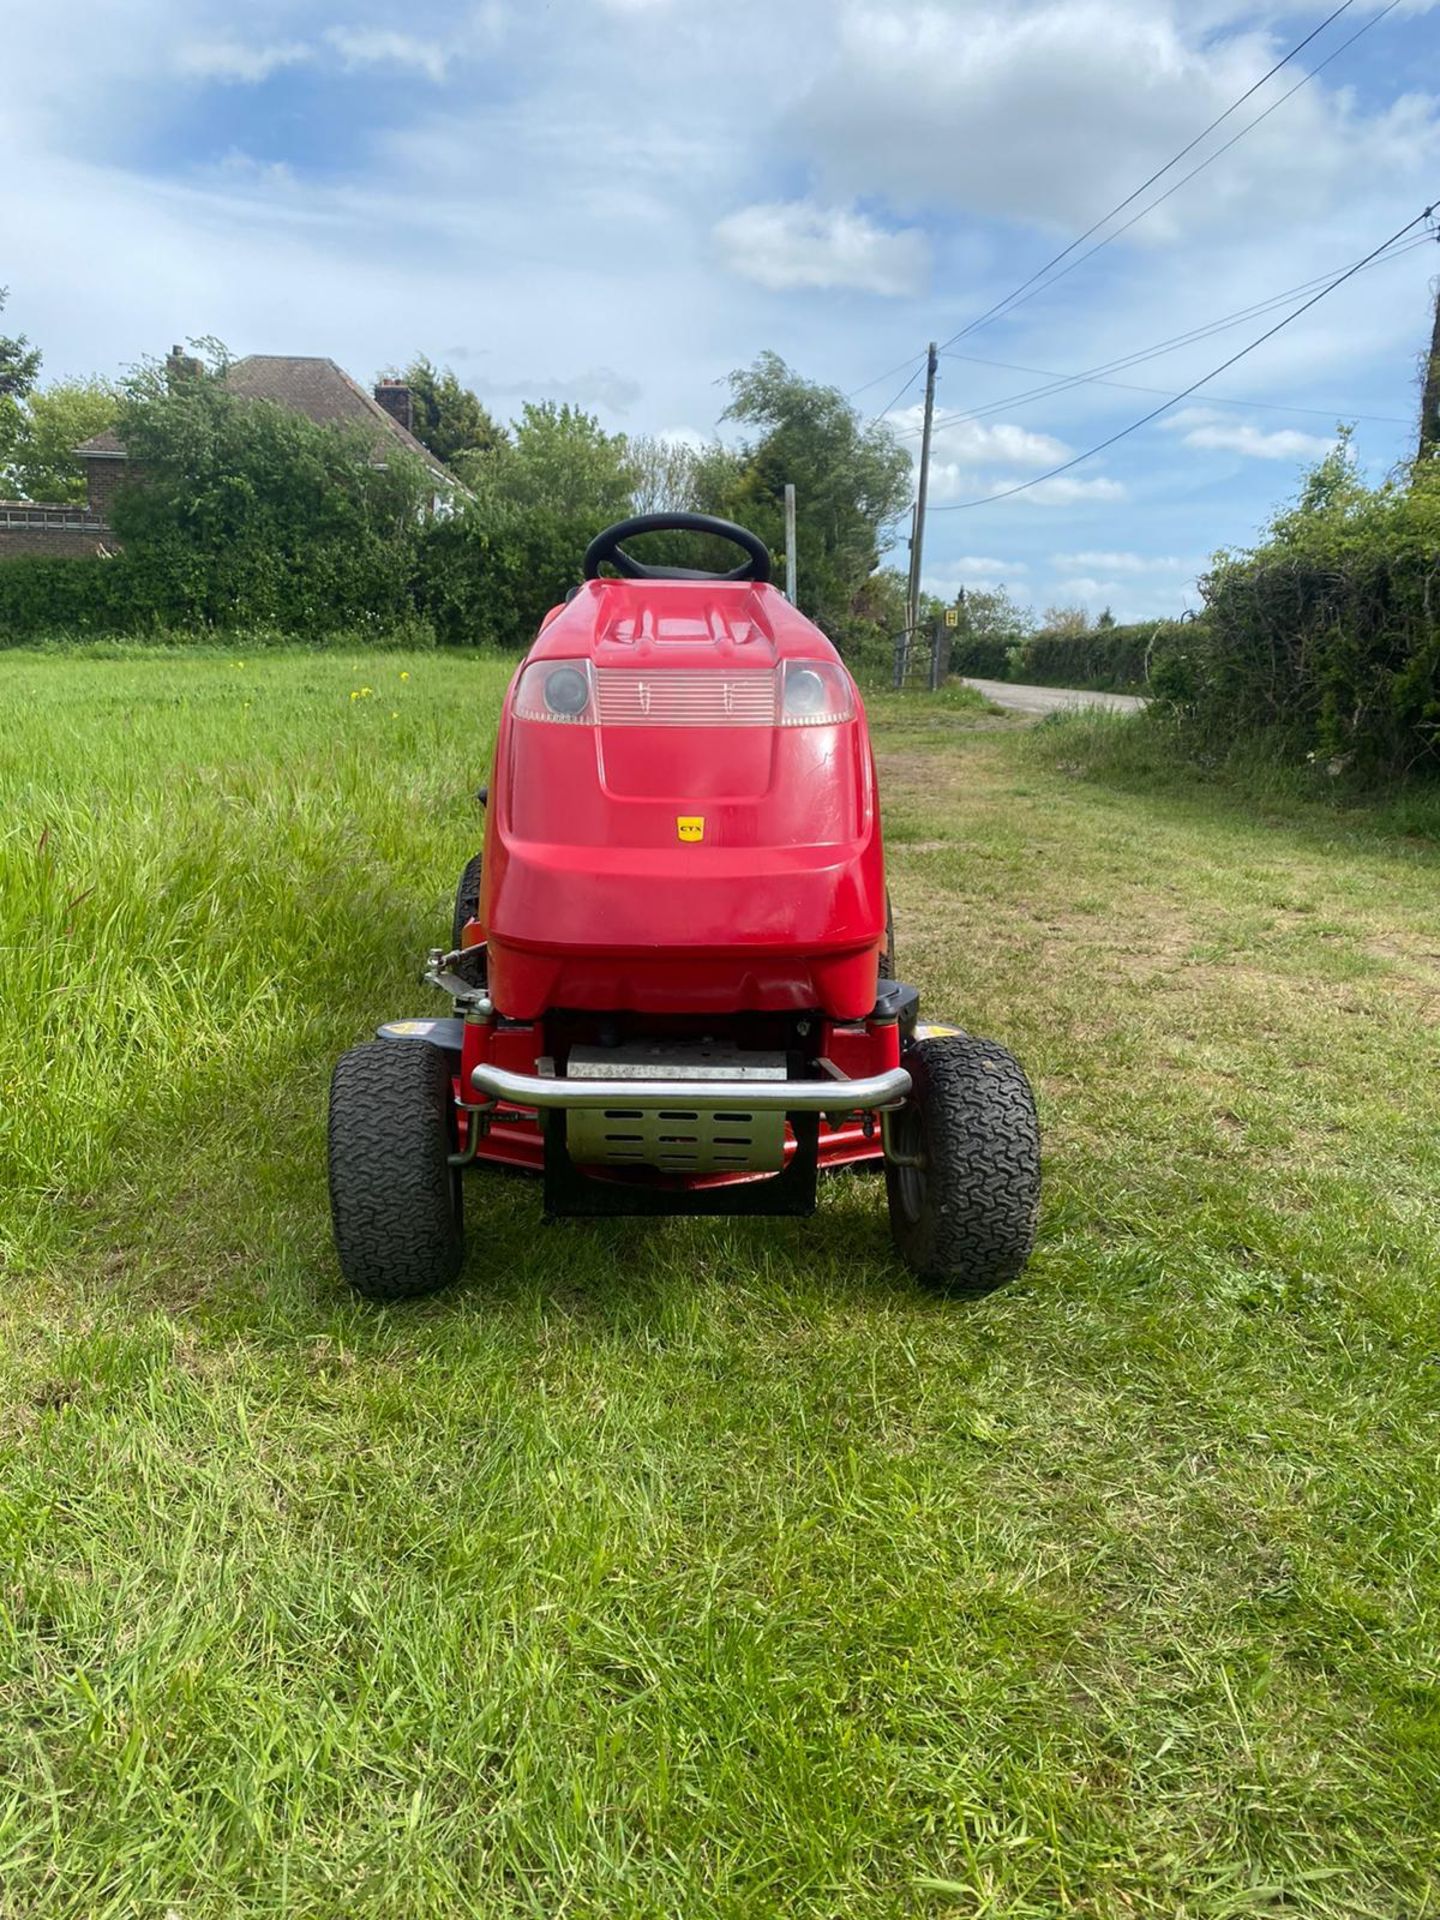 COUNTAX C600H ride on lawn mower, 42 inch cutting deck *PLUS VAT* - Image 7 of 8